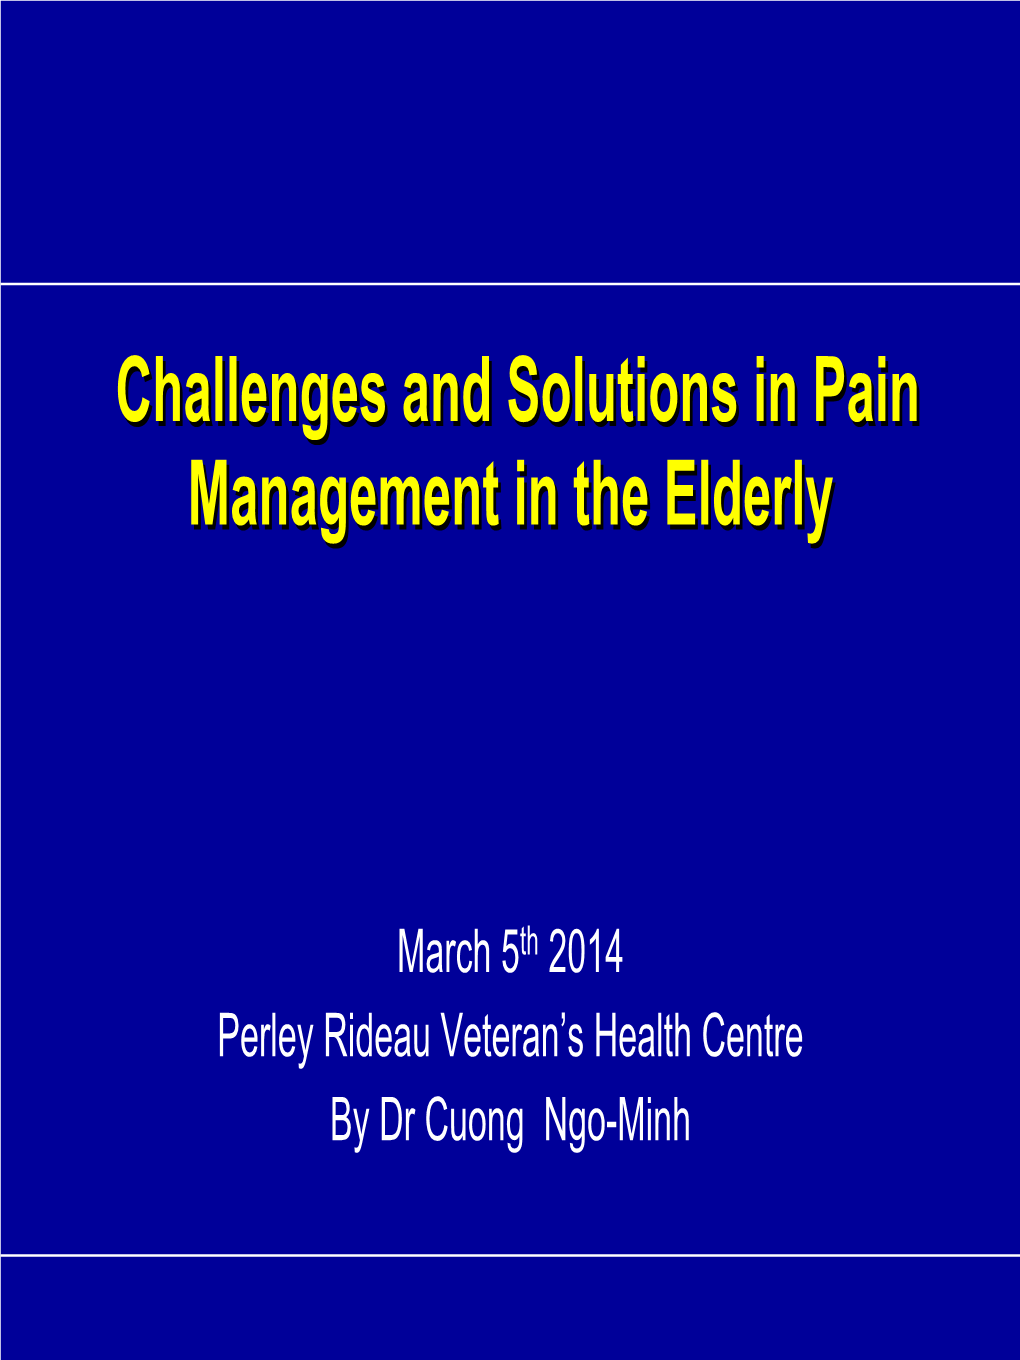 Challenges and Solutions in Pain Management in the Elderly